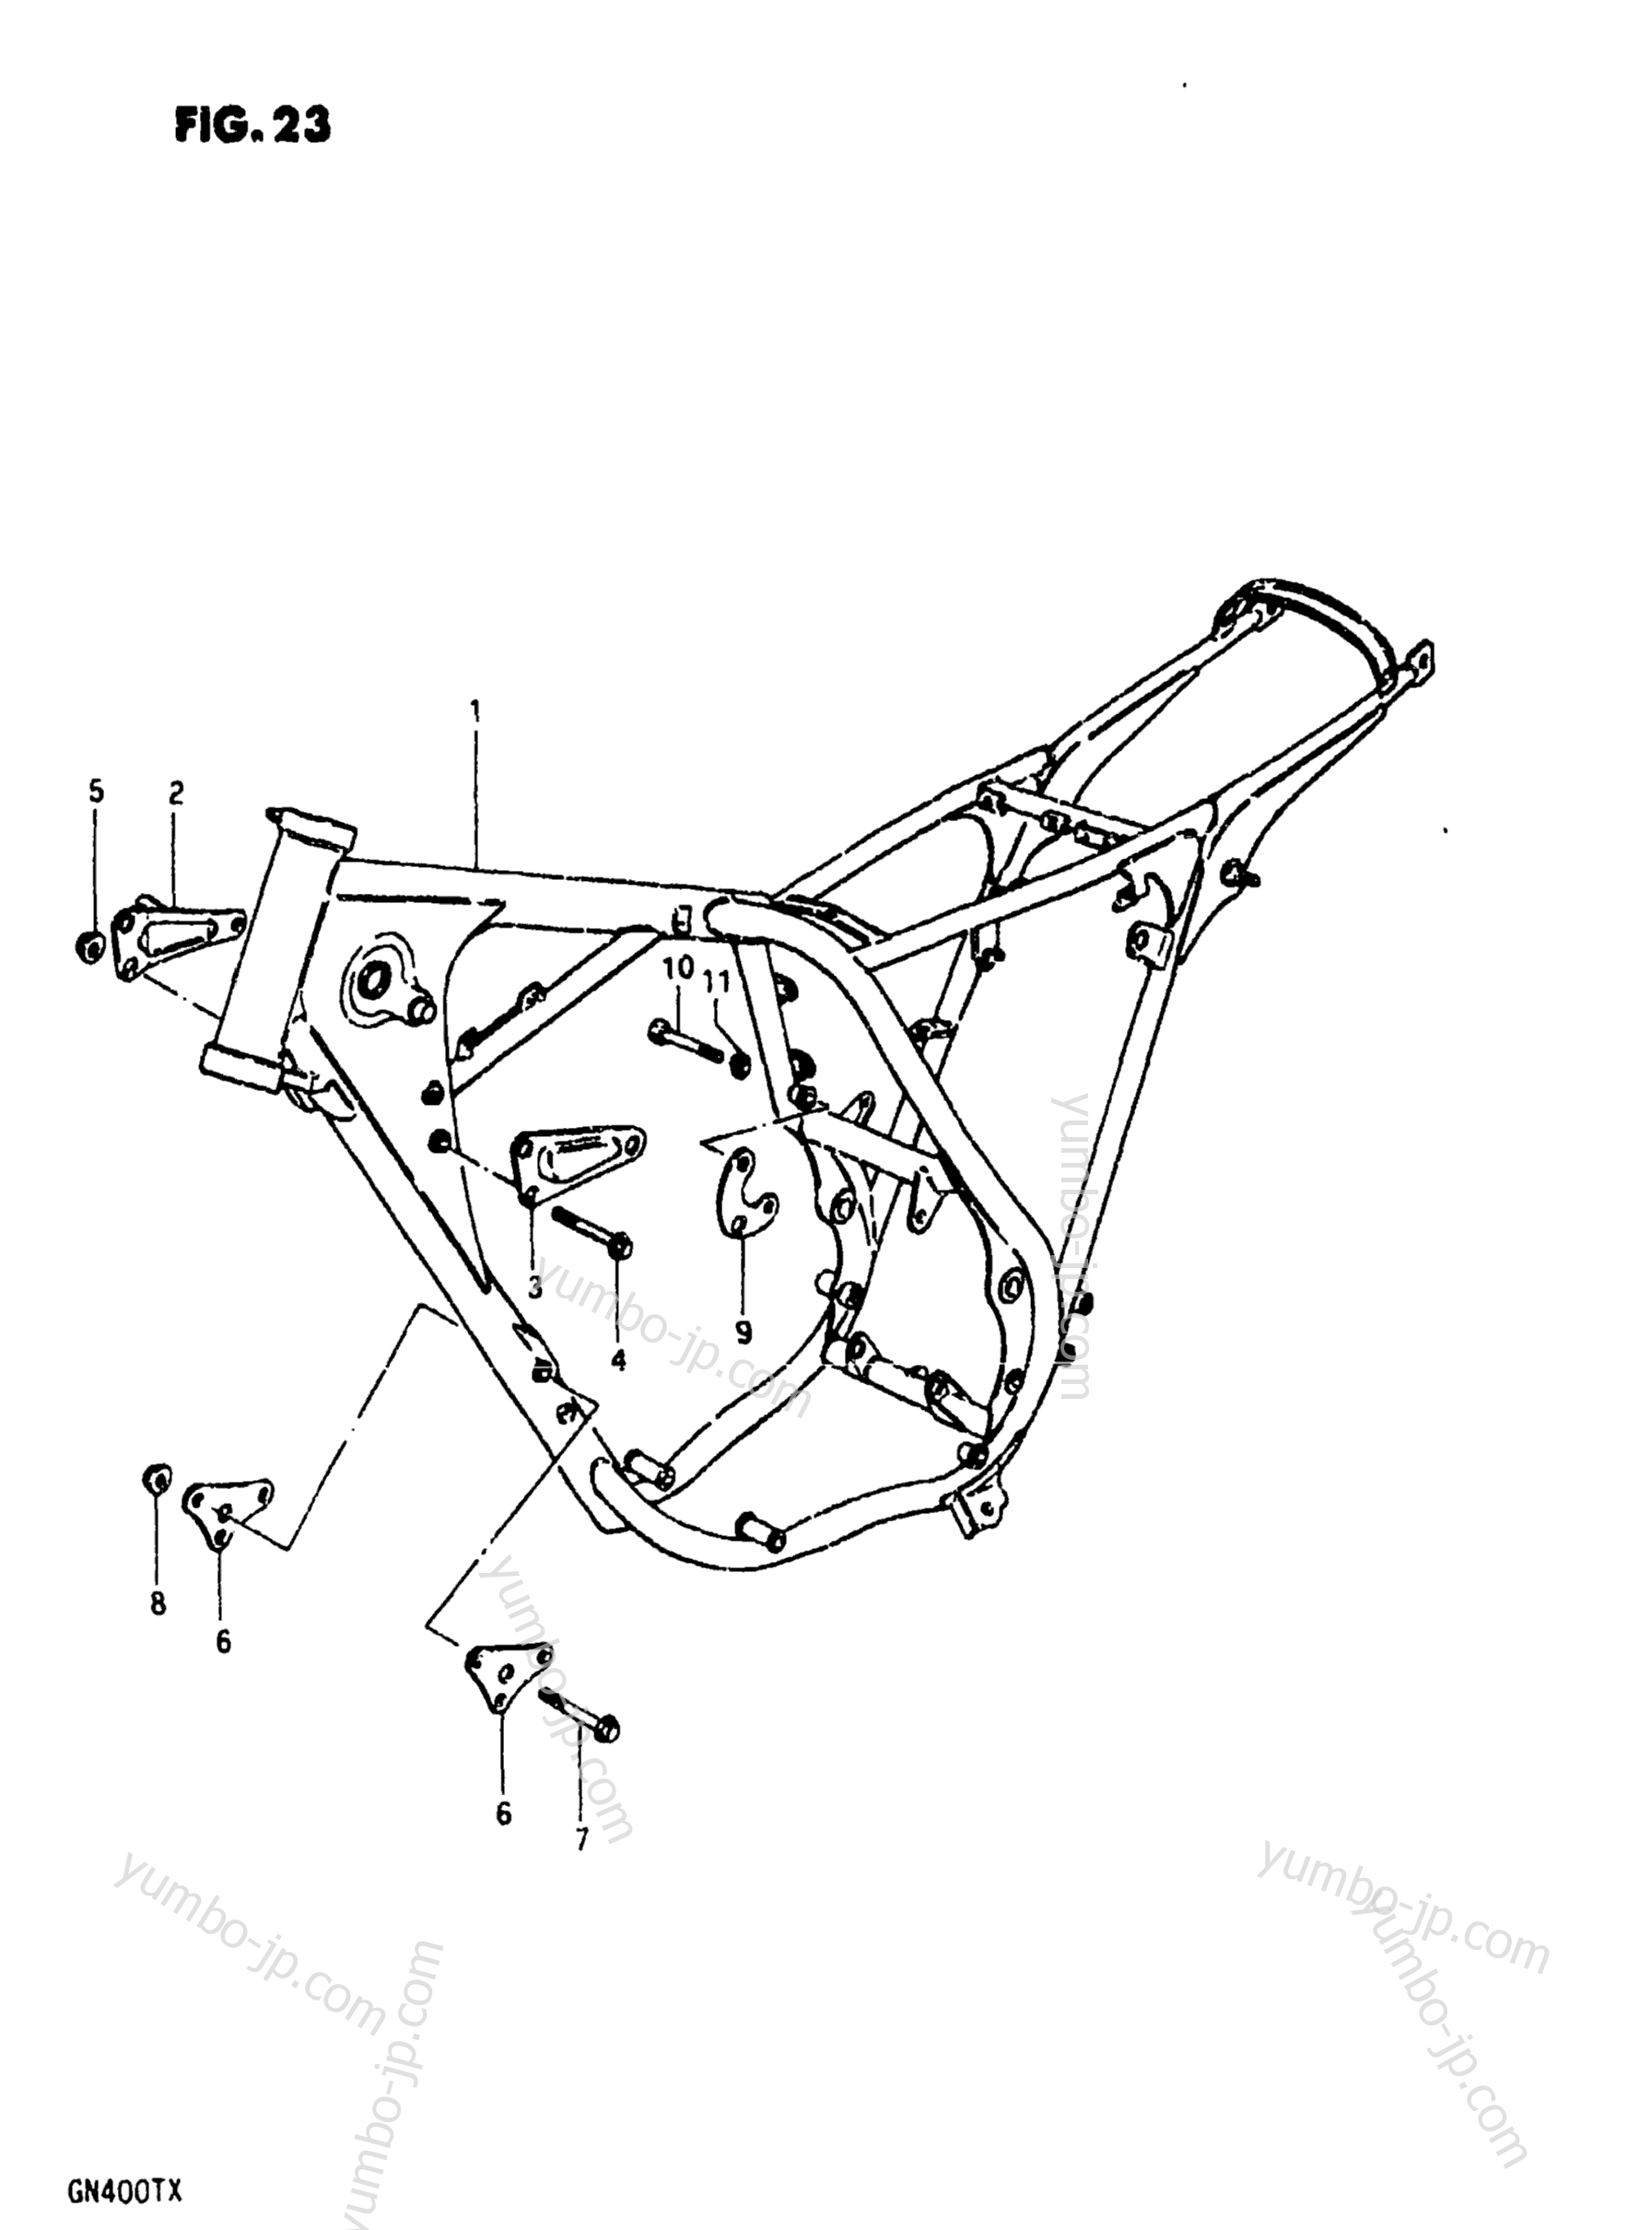 FRAME for motorcycles SUZUKI GN400T 1980 year